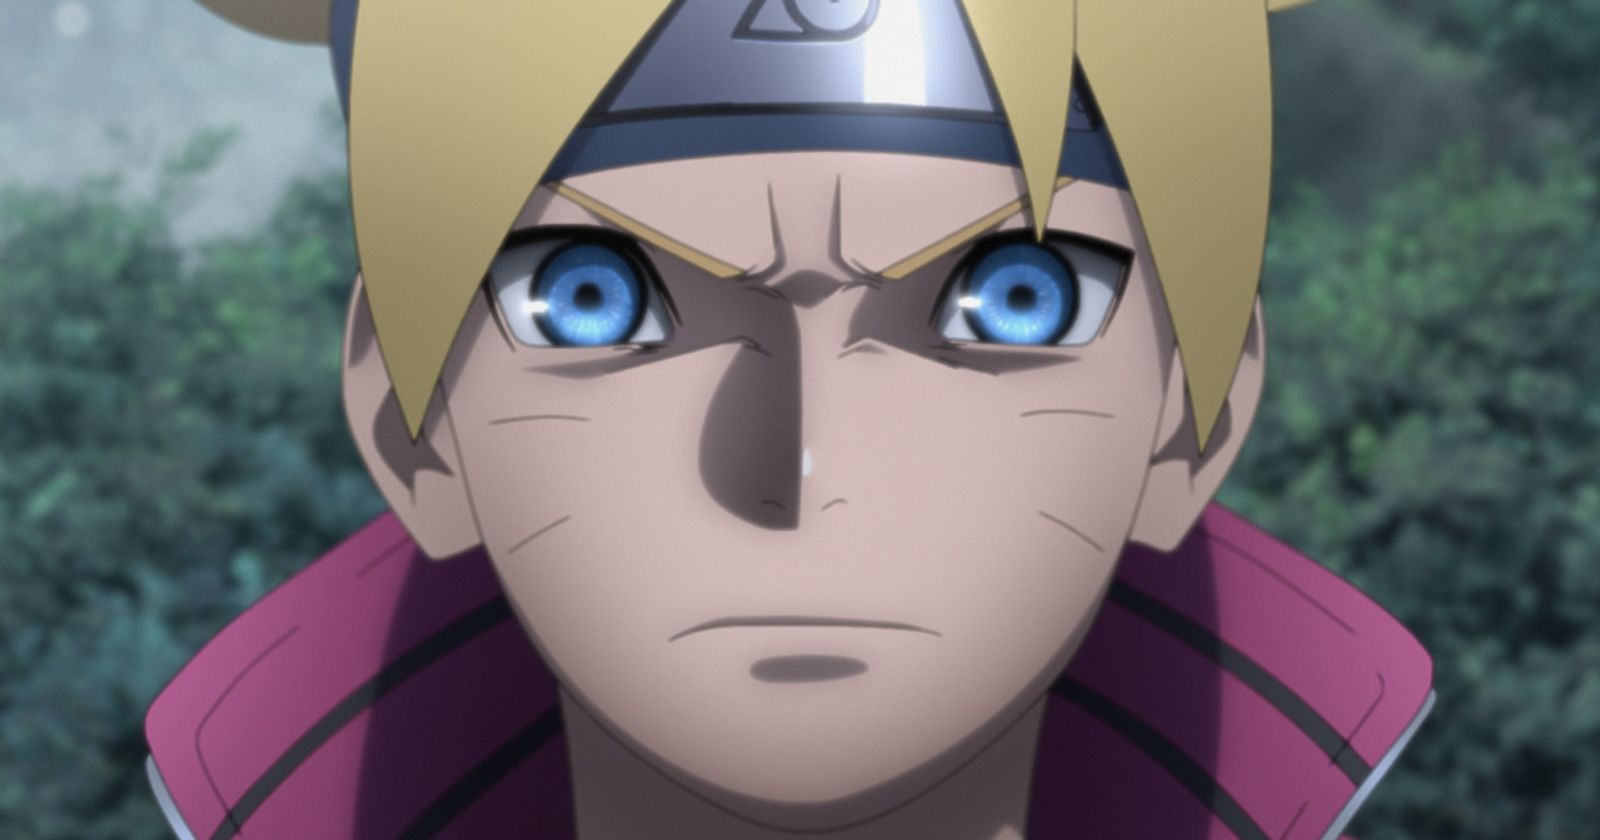 Boruto: Naruto Next Generations Part I comes to an end on March 26